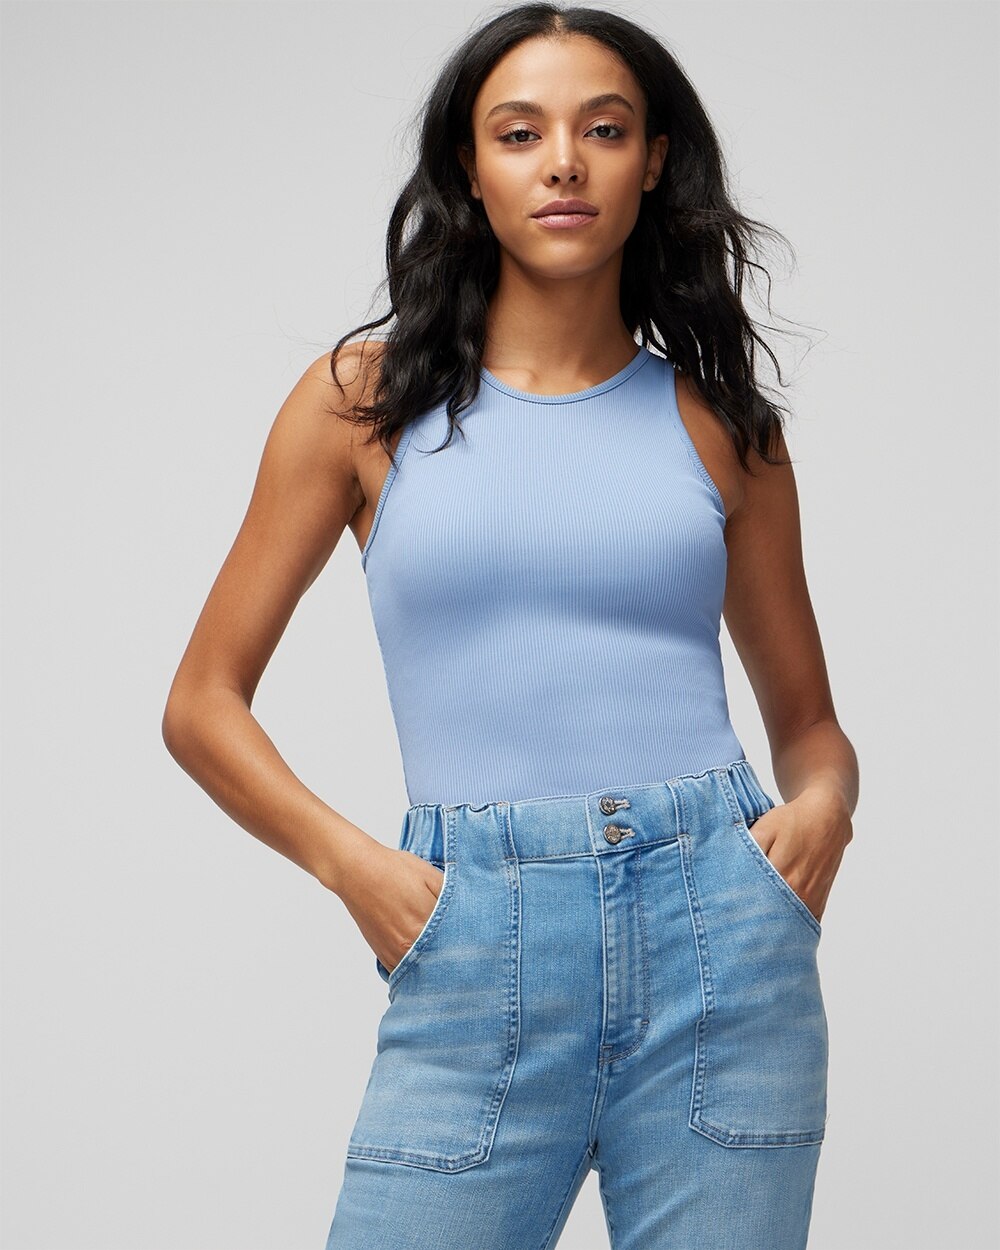 WHITE HOUSE BLACK MARKET RIBBED TANK TOP IN LIGHT BLUE SIZE XS | WHITE HOUSE BLACK MARKET